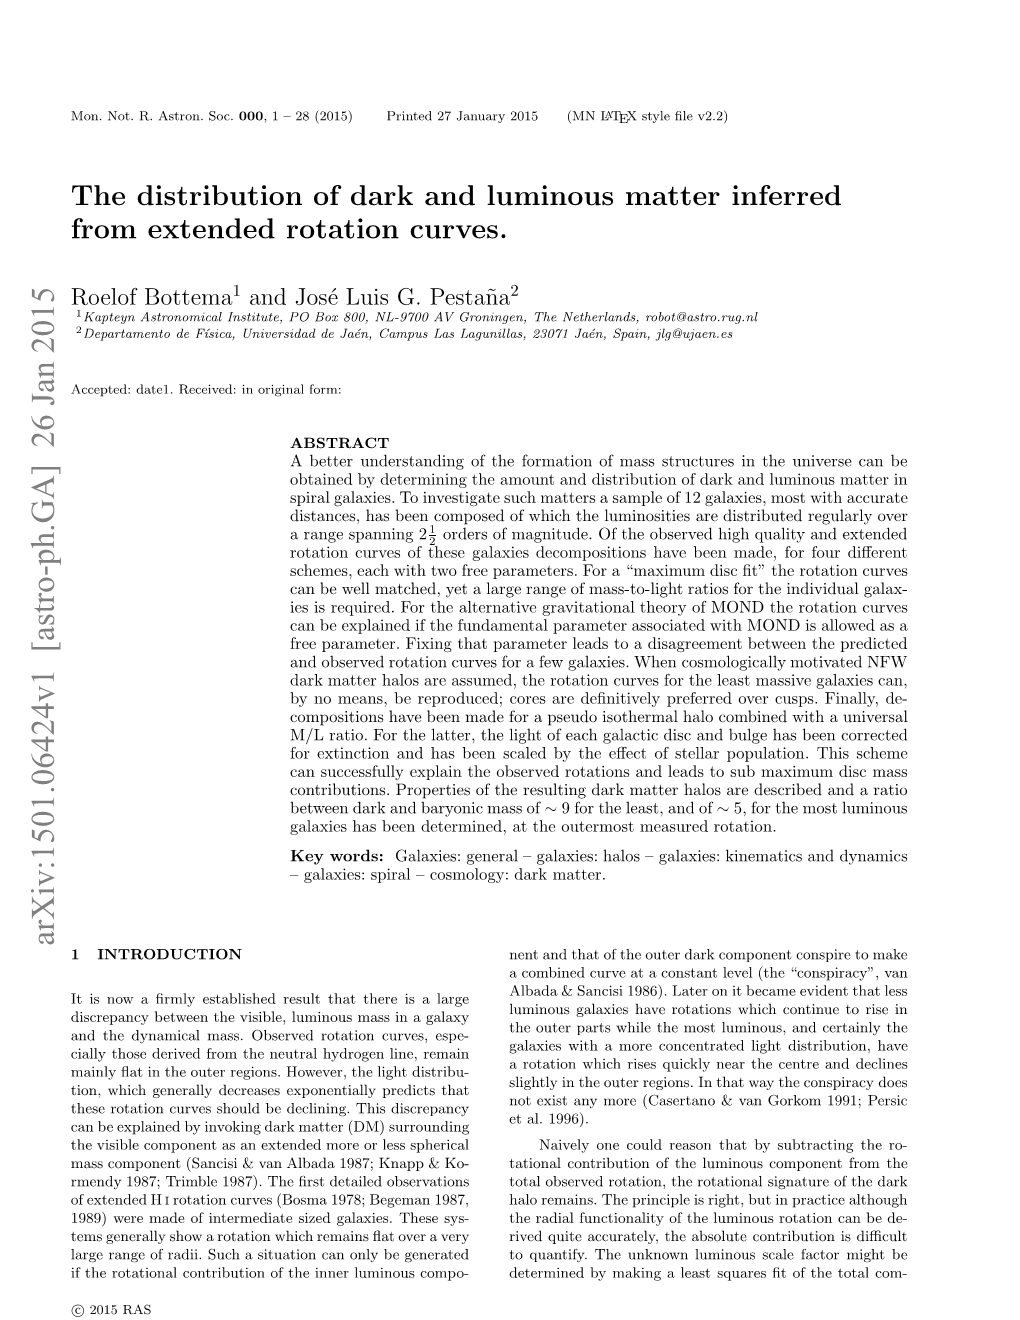 The Distribution of Dark and Luminous Matter Inferred from Extended